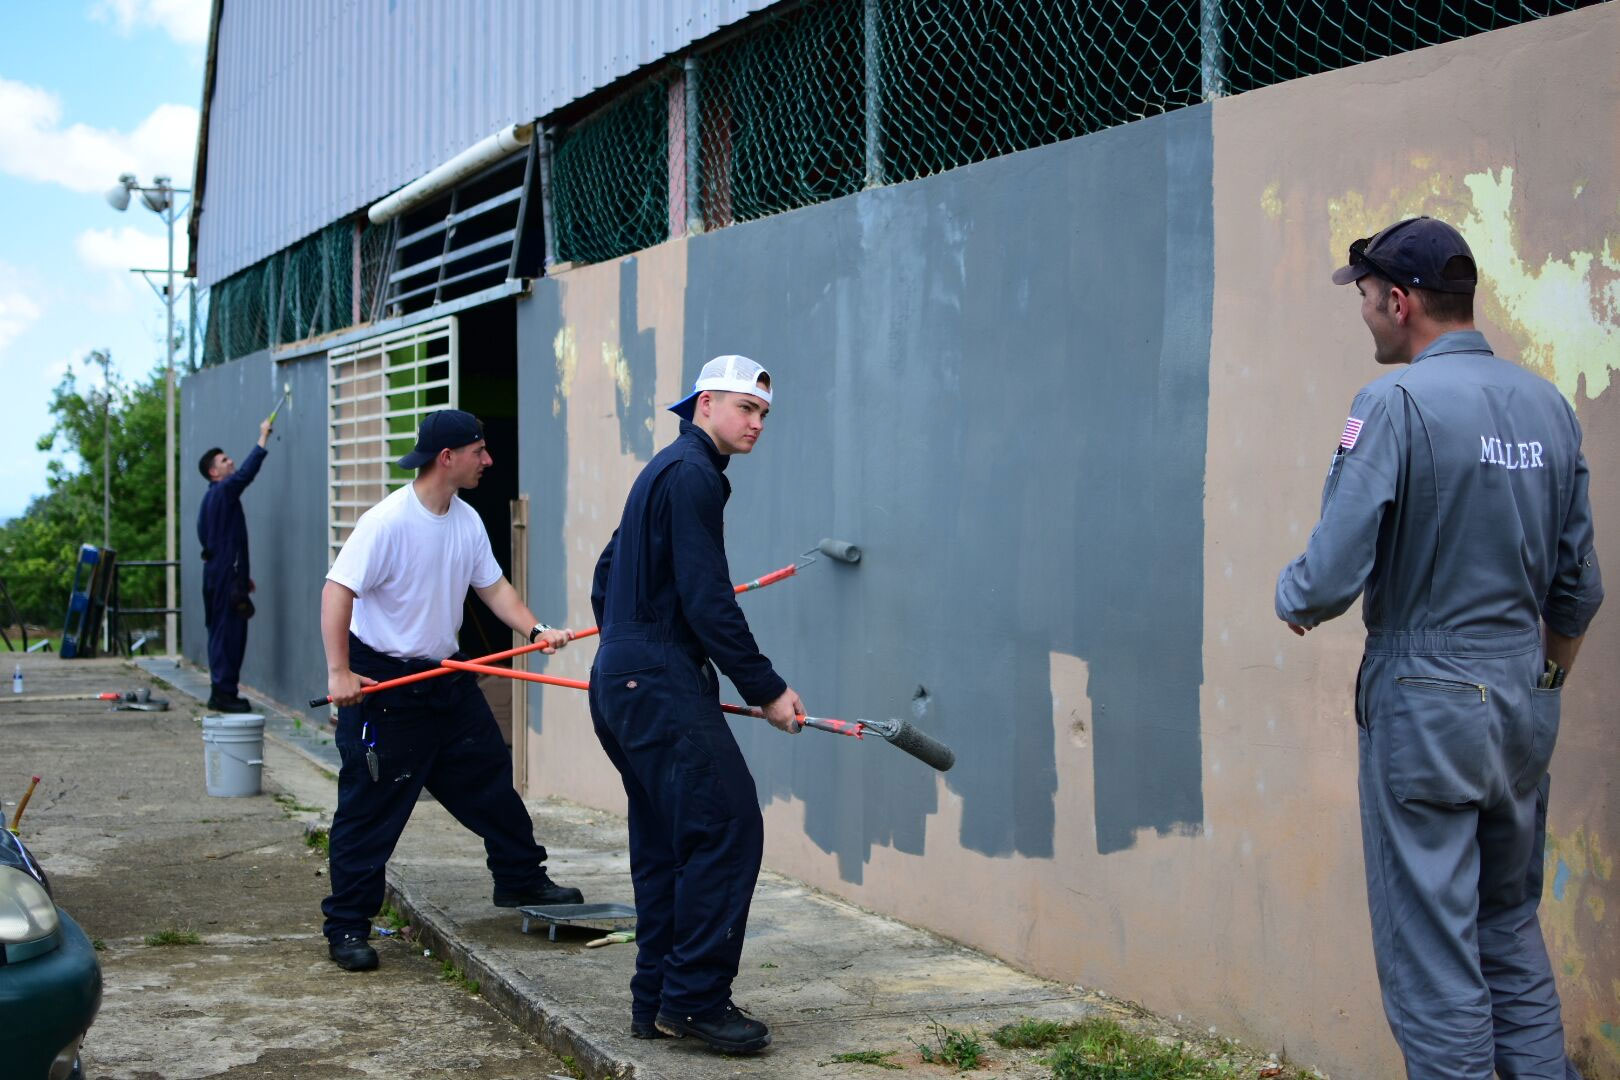 SUNY Maritime College students paint a building exterior in Puerto Rico.